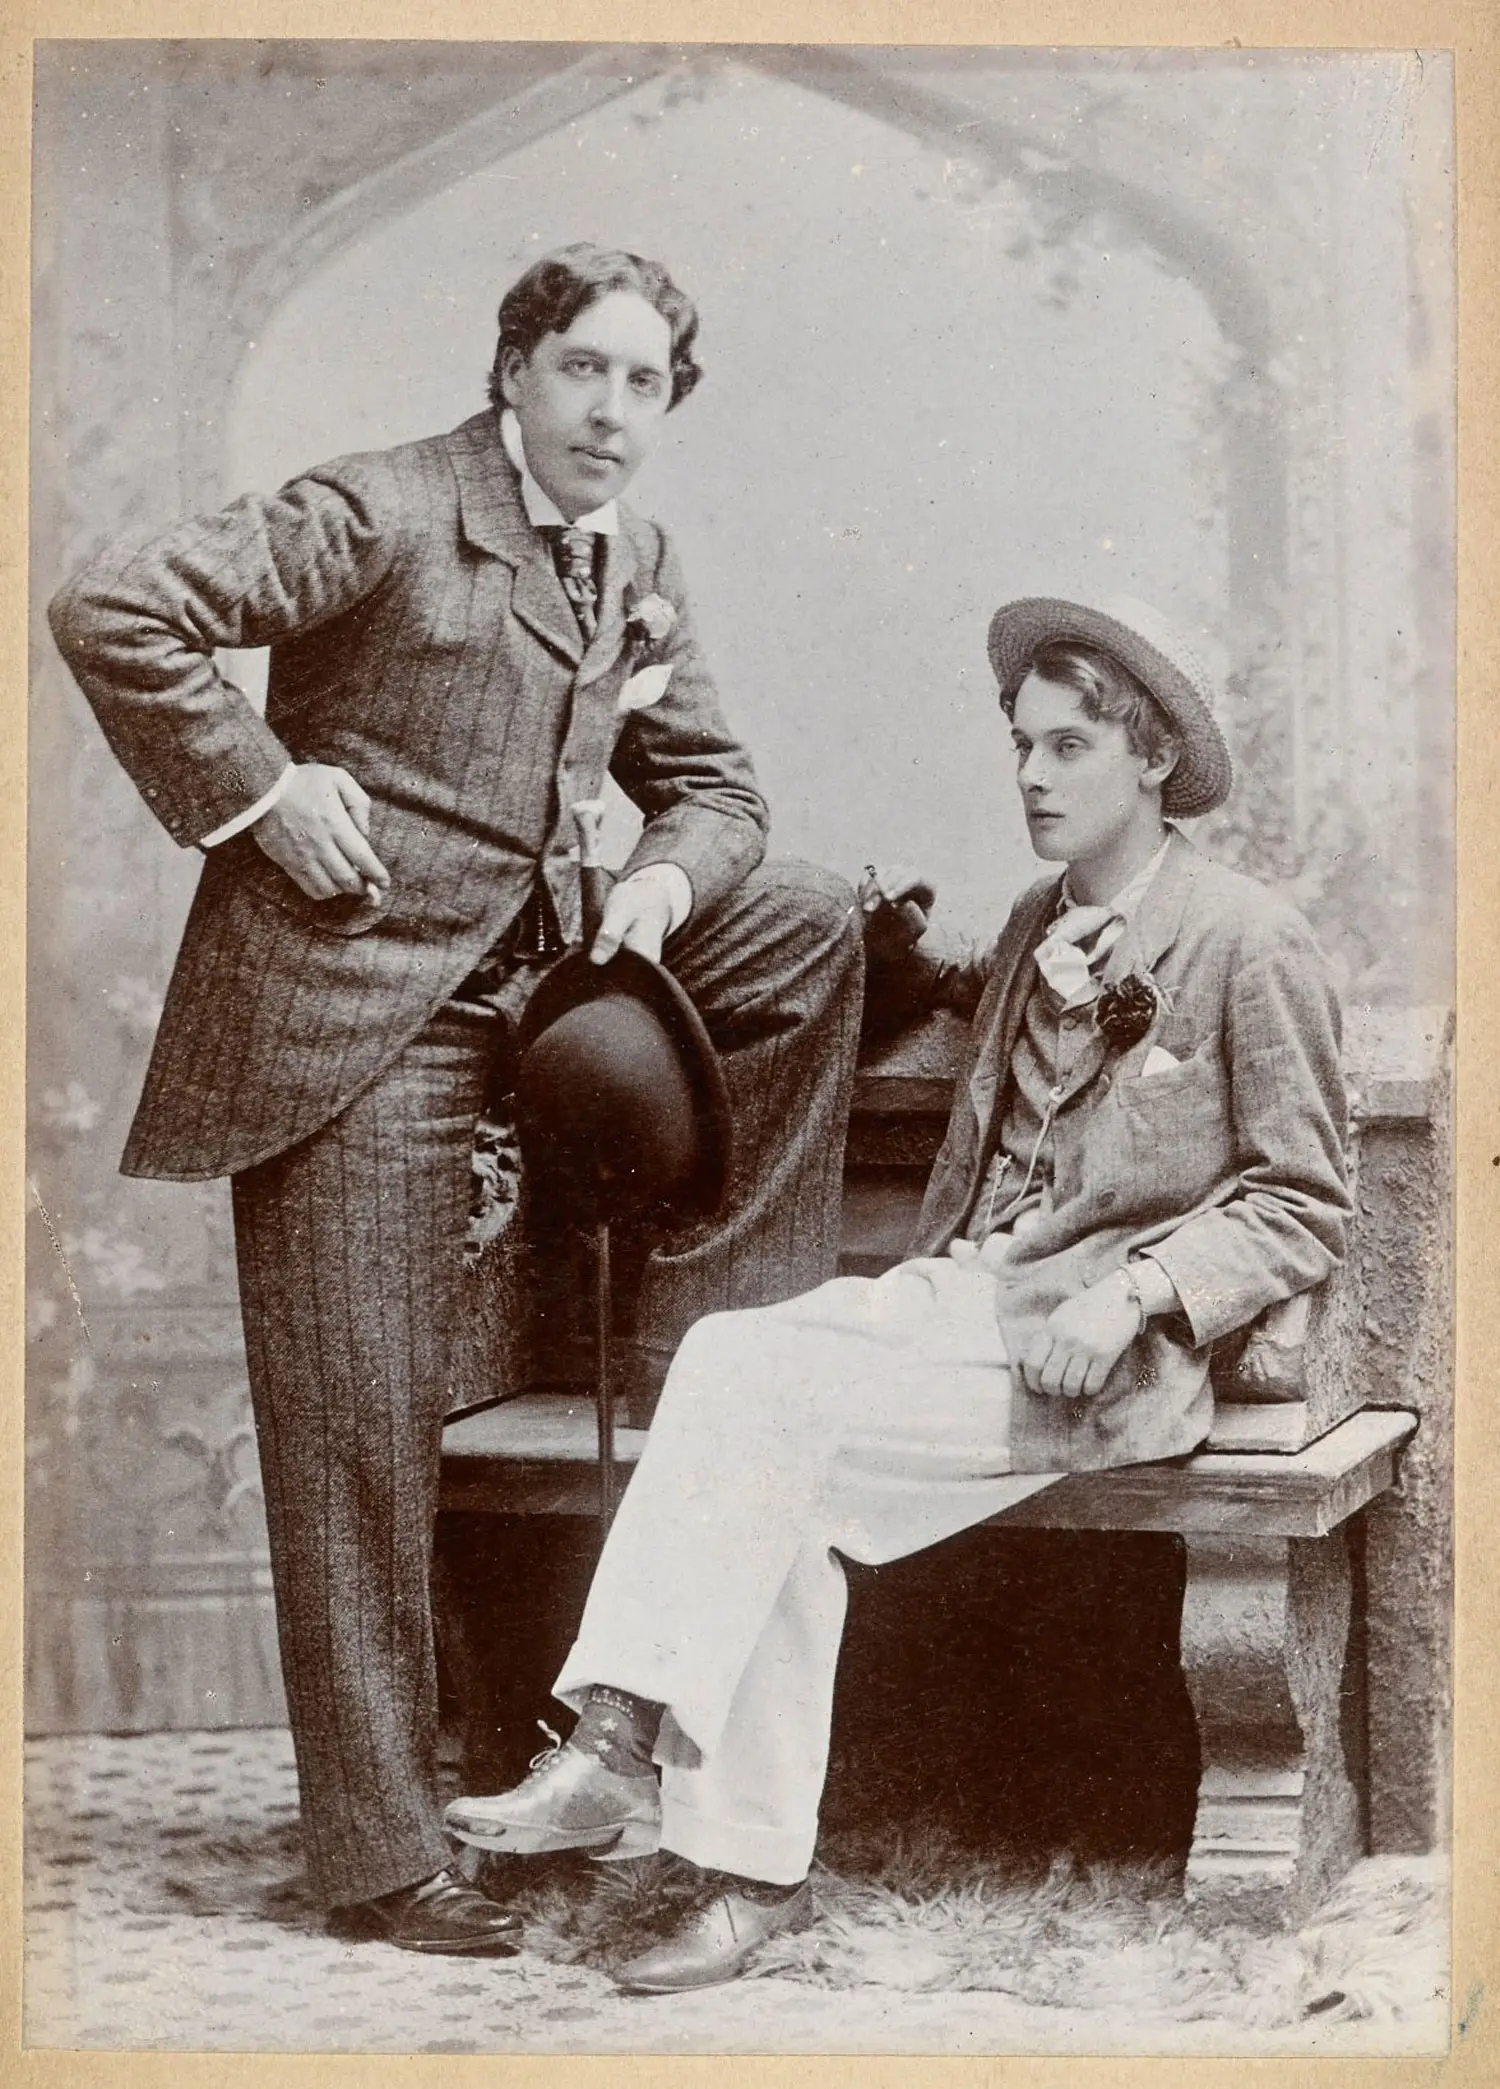 A studio photograph of Oscar Wilde and Lord Alfred Douglas.